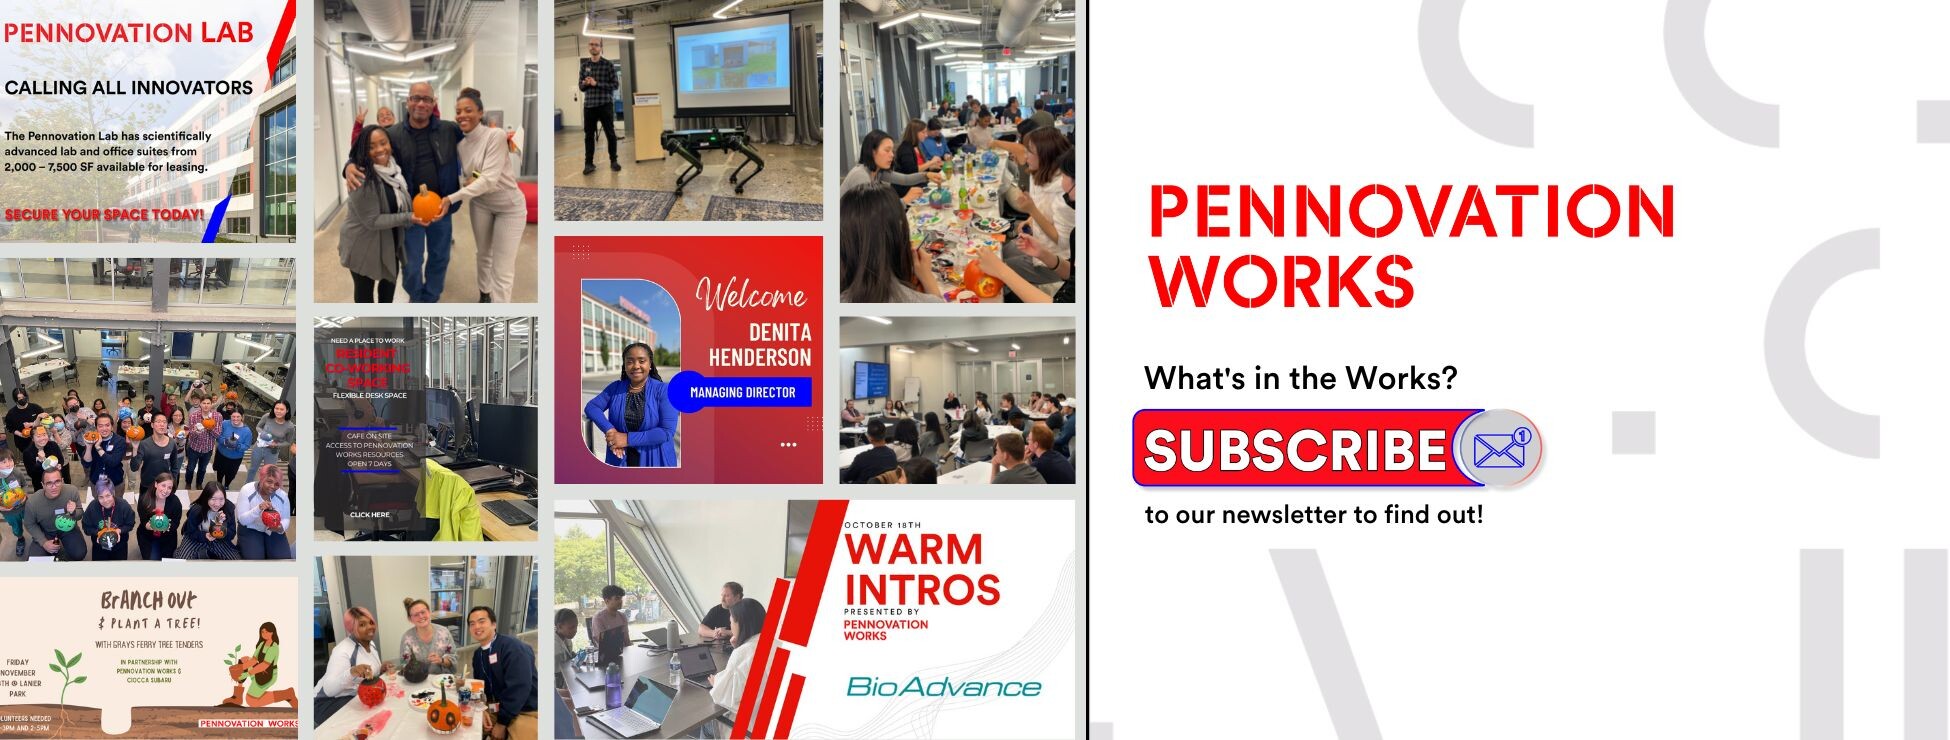 Subscribe to the Pennovation Newsletter